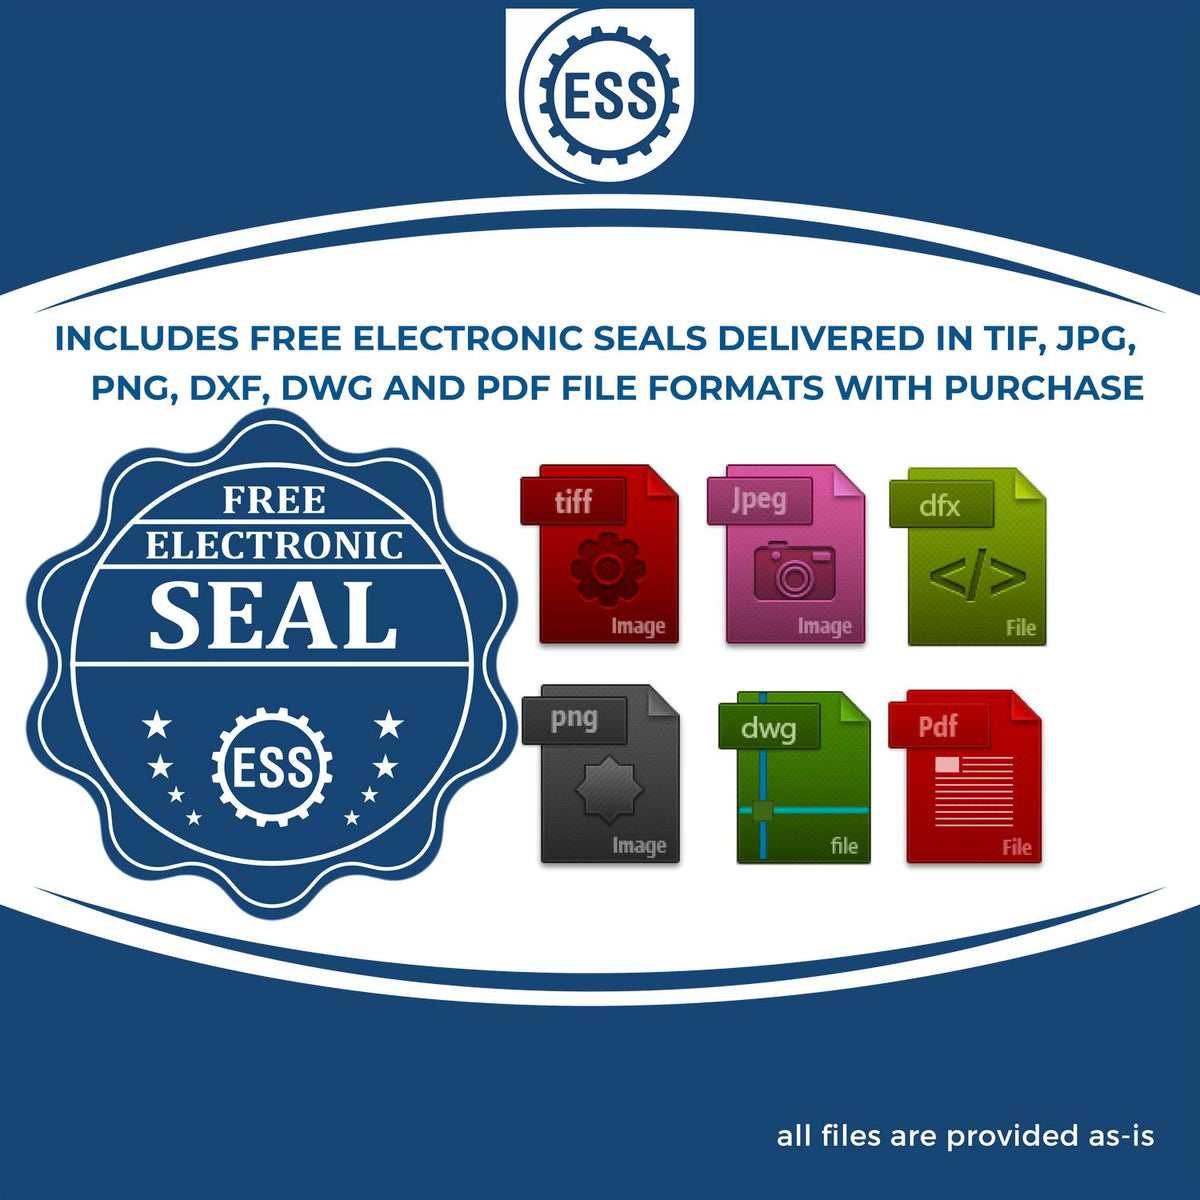 An infographic for the free electronic seal for the Heavy-Duty Minnesota Rectangular Notary Stamp illustrating the different file type icons such as DXF, DWG, TIF, JPG and PNG.